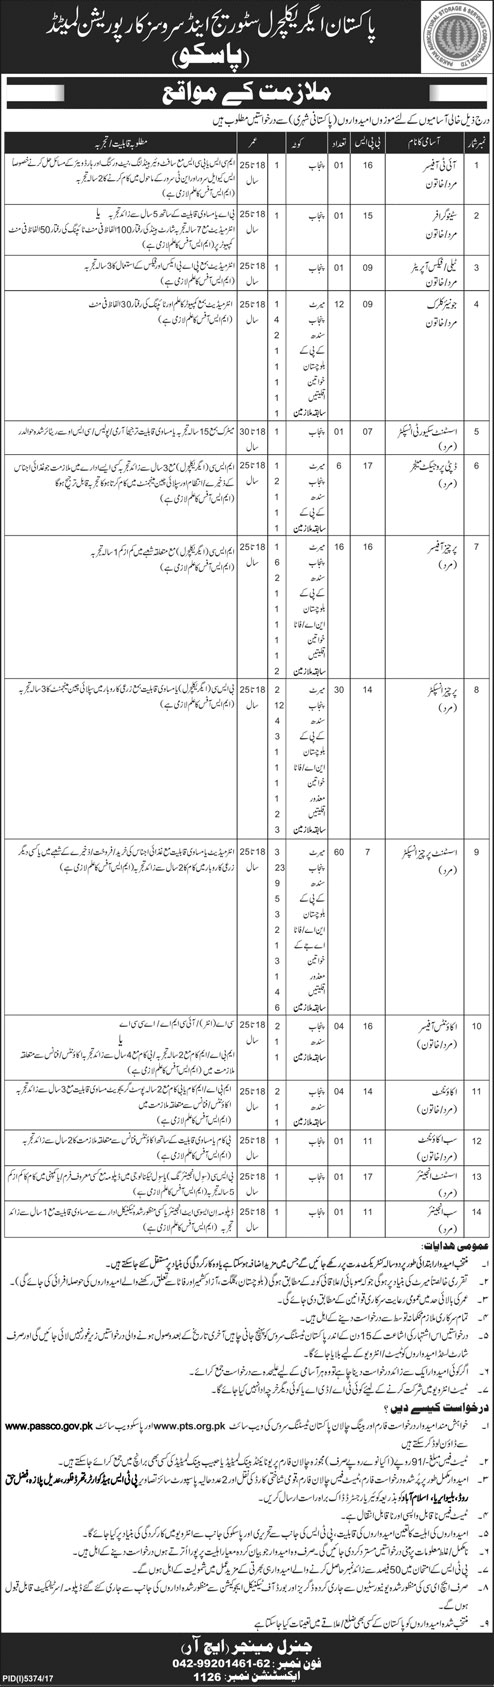 Jobs in Pakistan Agricultural Storage and Services Corporation Limited 01 April 2018